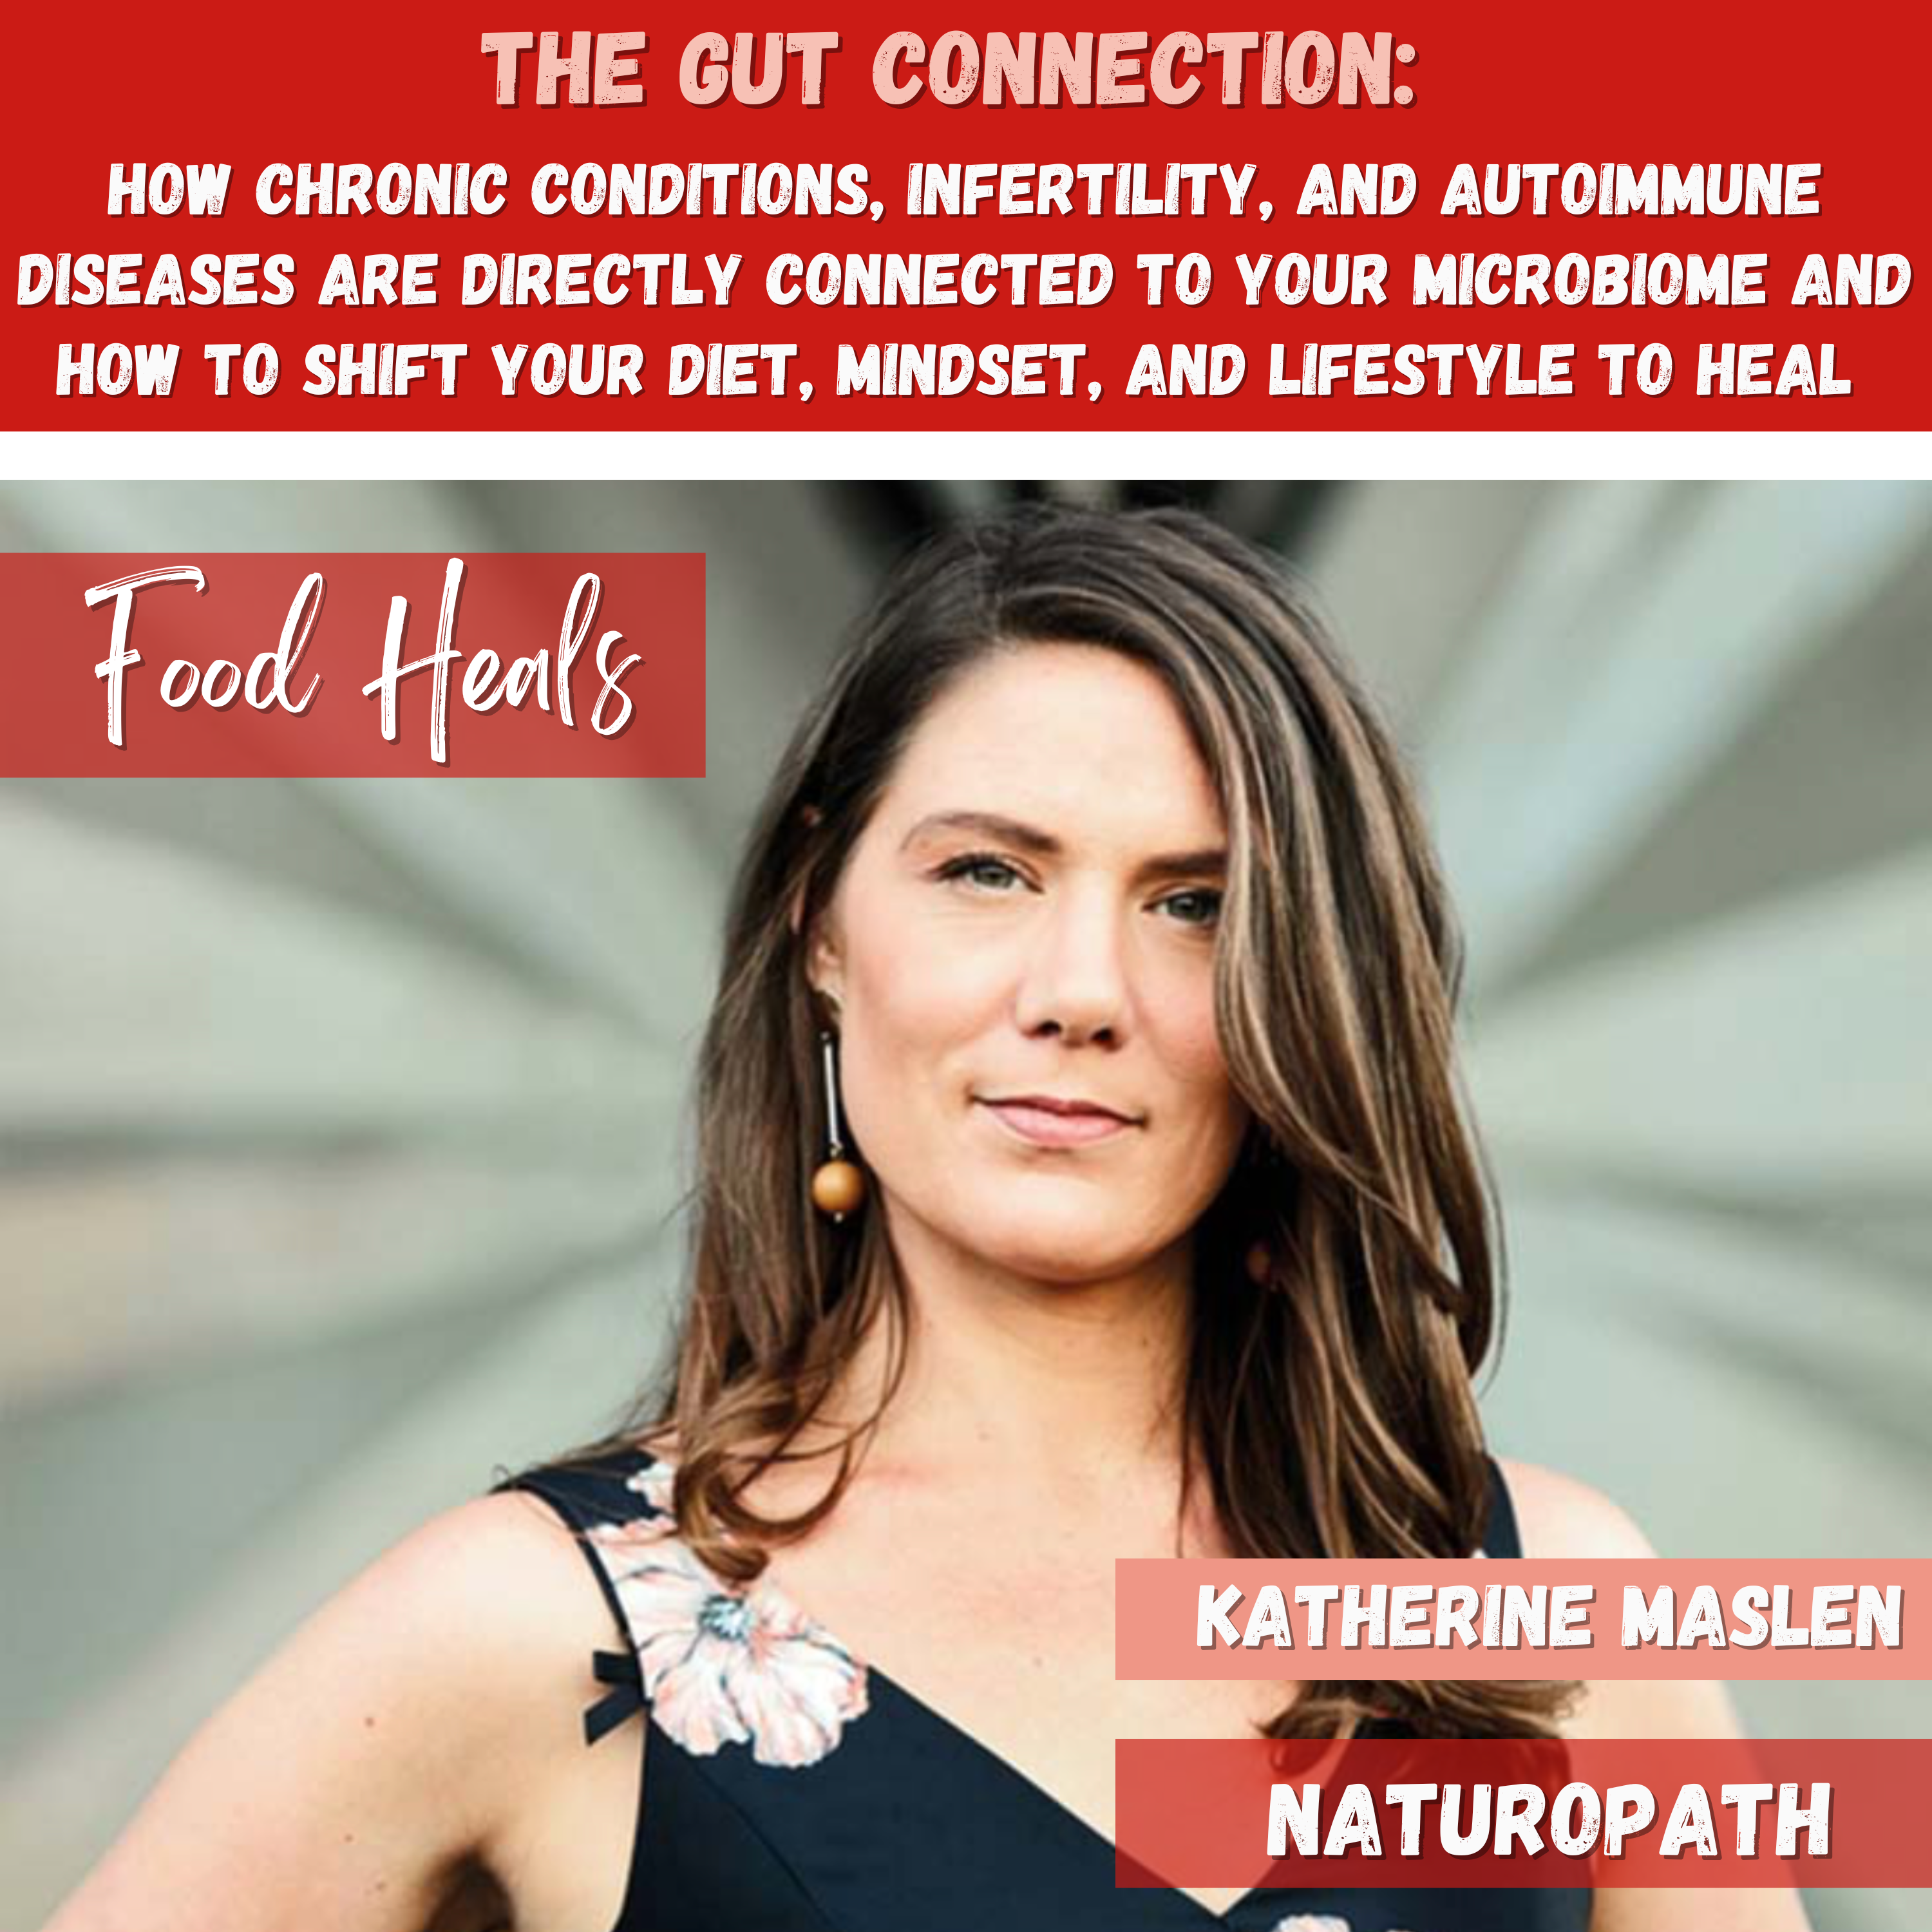 The Gut Connection: How Chronic Conditions, Infertility, and Autoimmune Diseases are Directly Connected to Your Microbiome and How to Shift Your Diet, Mindset, and Lifestyle to Heal with Naturopath Katherine Maslen (Food Heals Podcast)